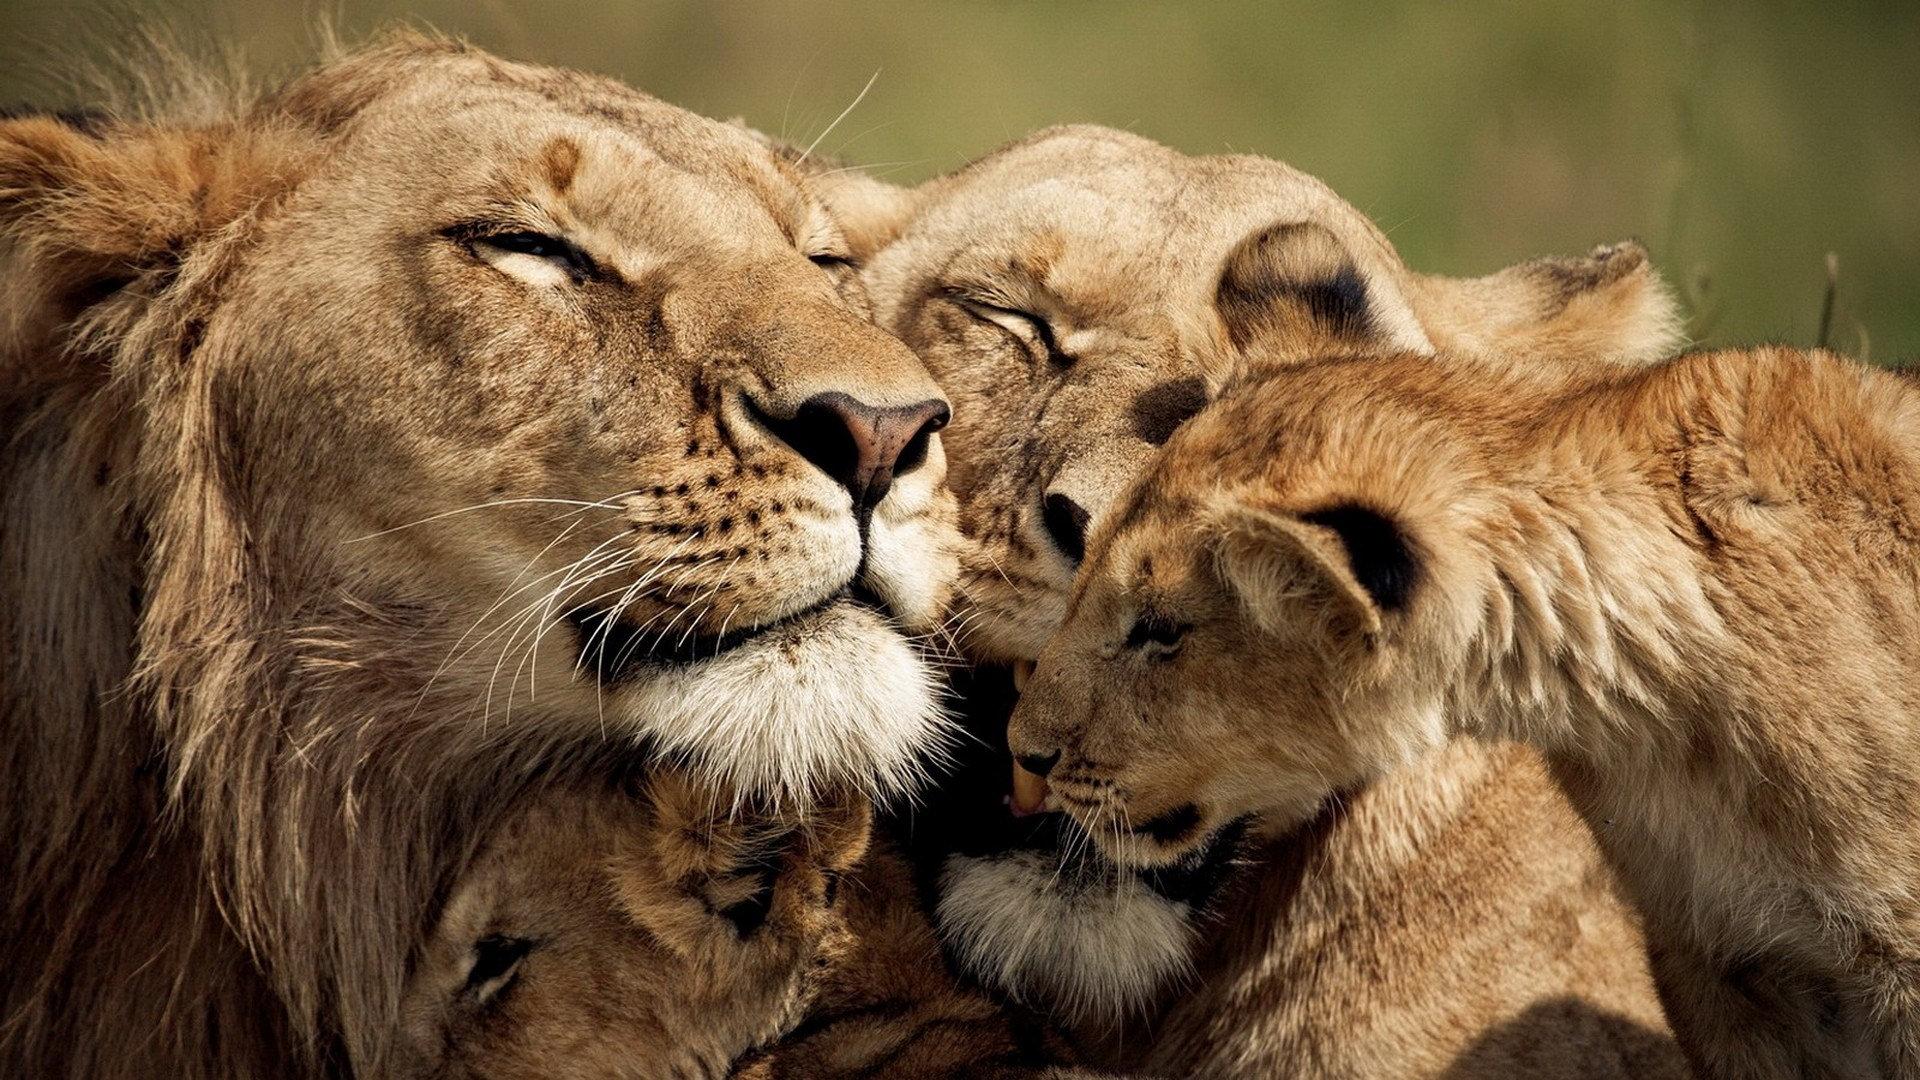 Download PRIDE OF LIONSBING IMAGES OUR ANIMAL FRIENDS NR 1